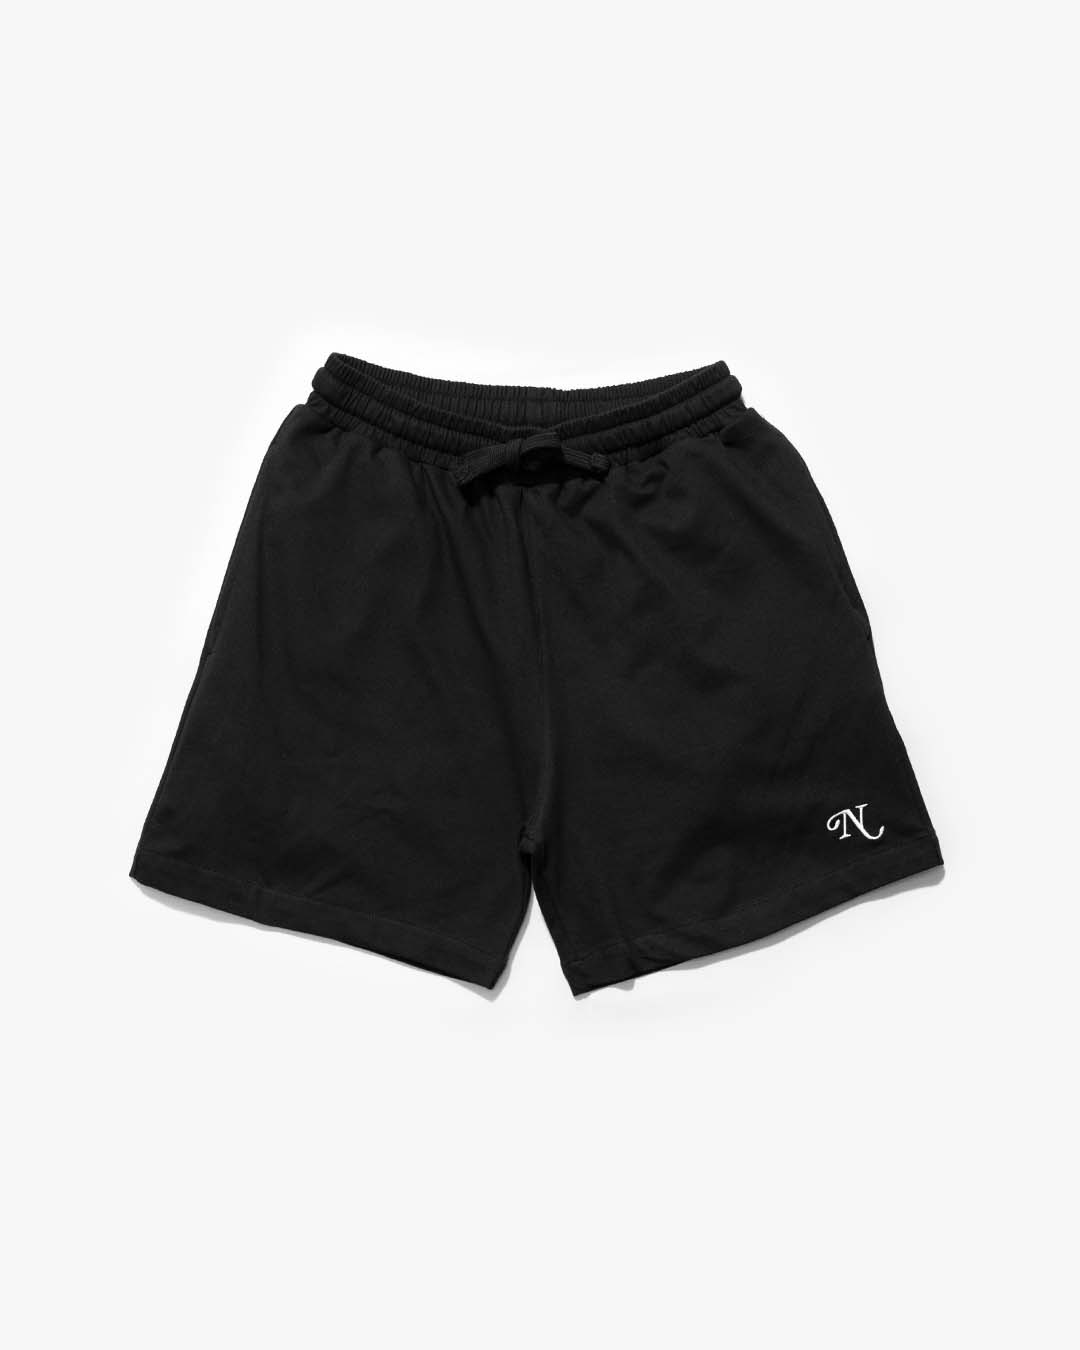 Luxe Shorts - Black